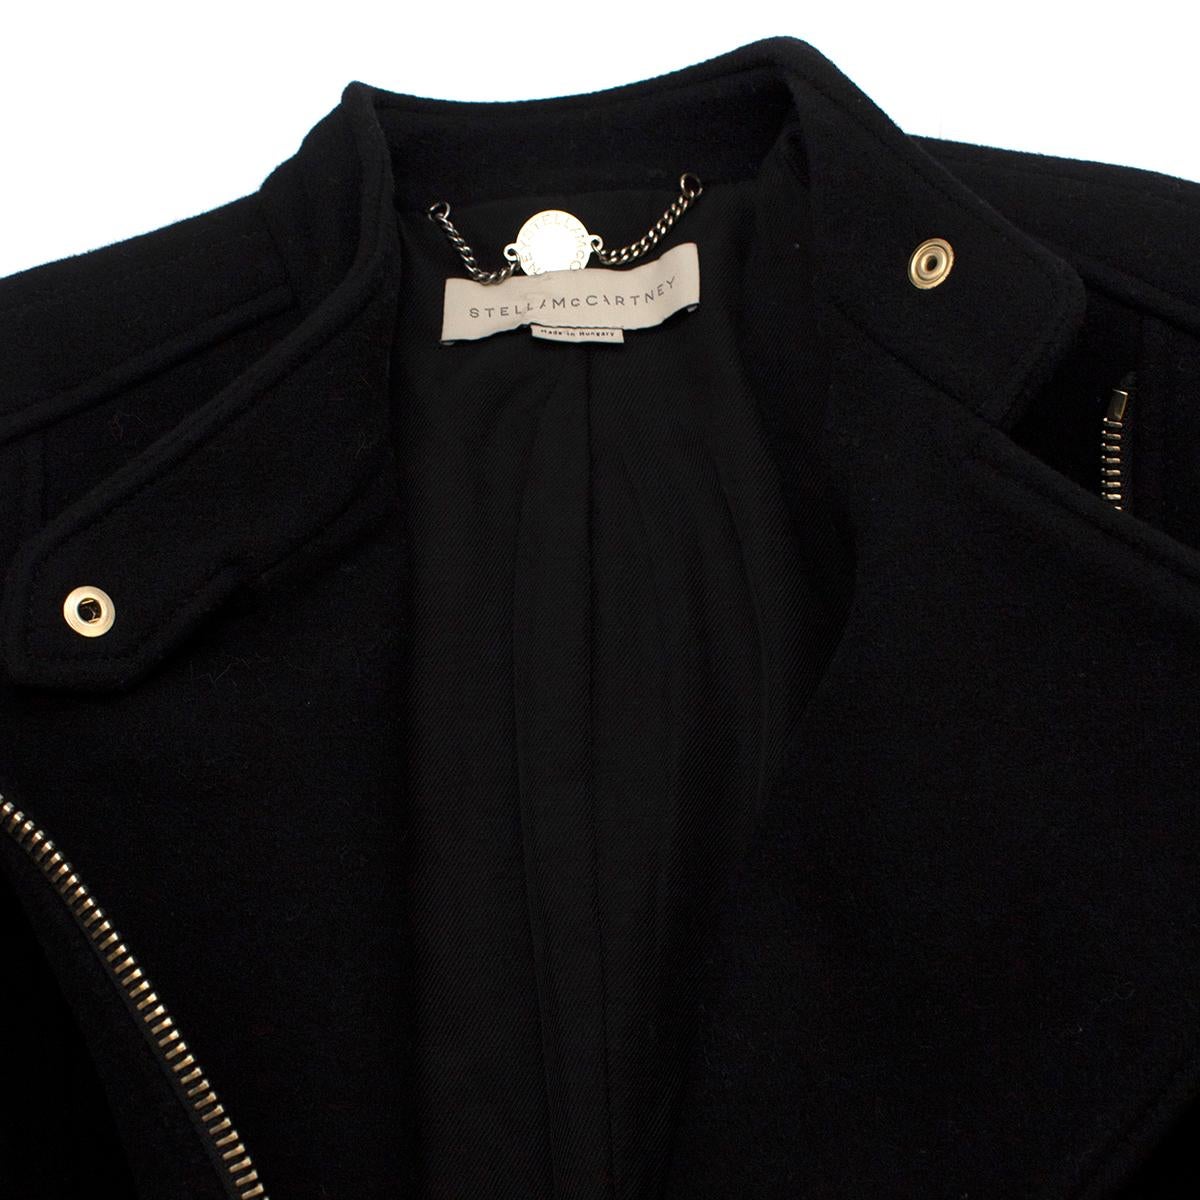 Stella McCartney Black Wool-blend Asymmetric Jacket IT 40 In Excellent Condition For Sale In London, GB